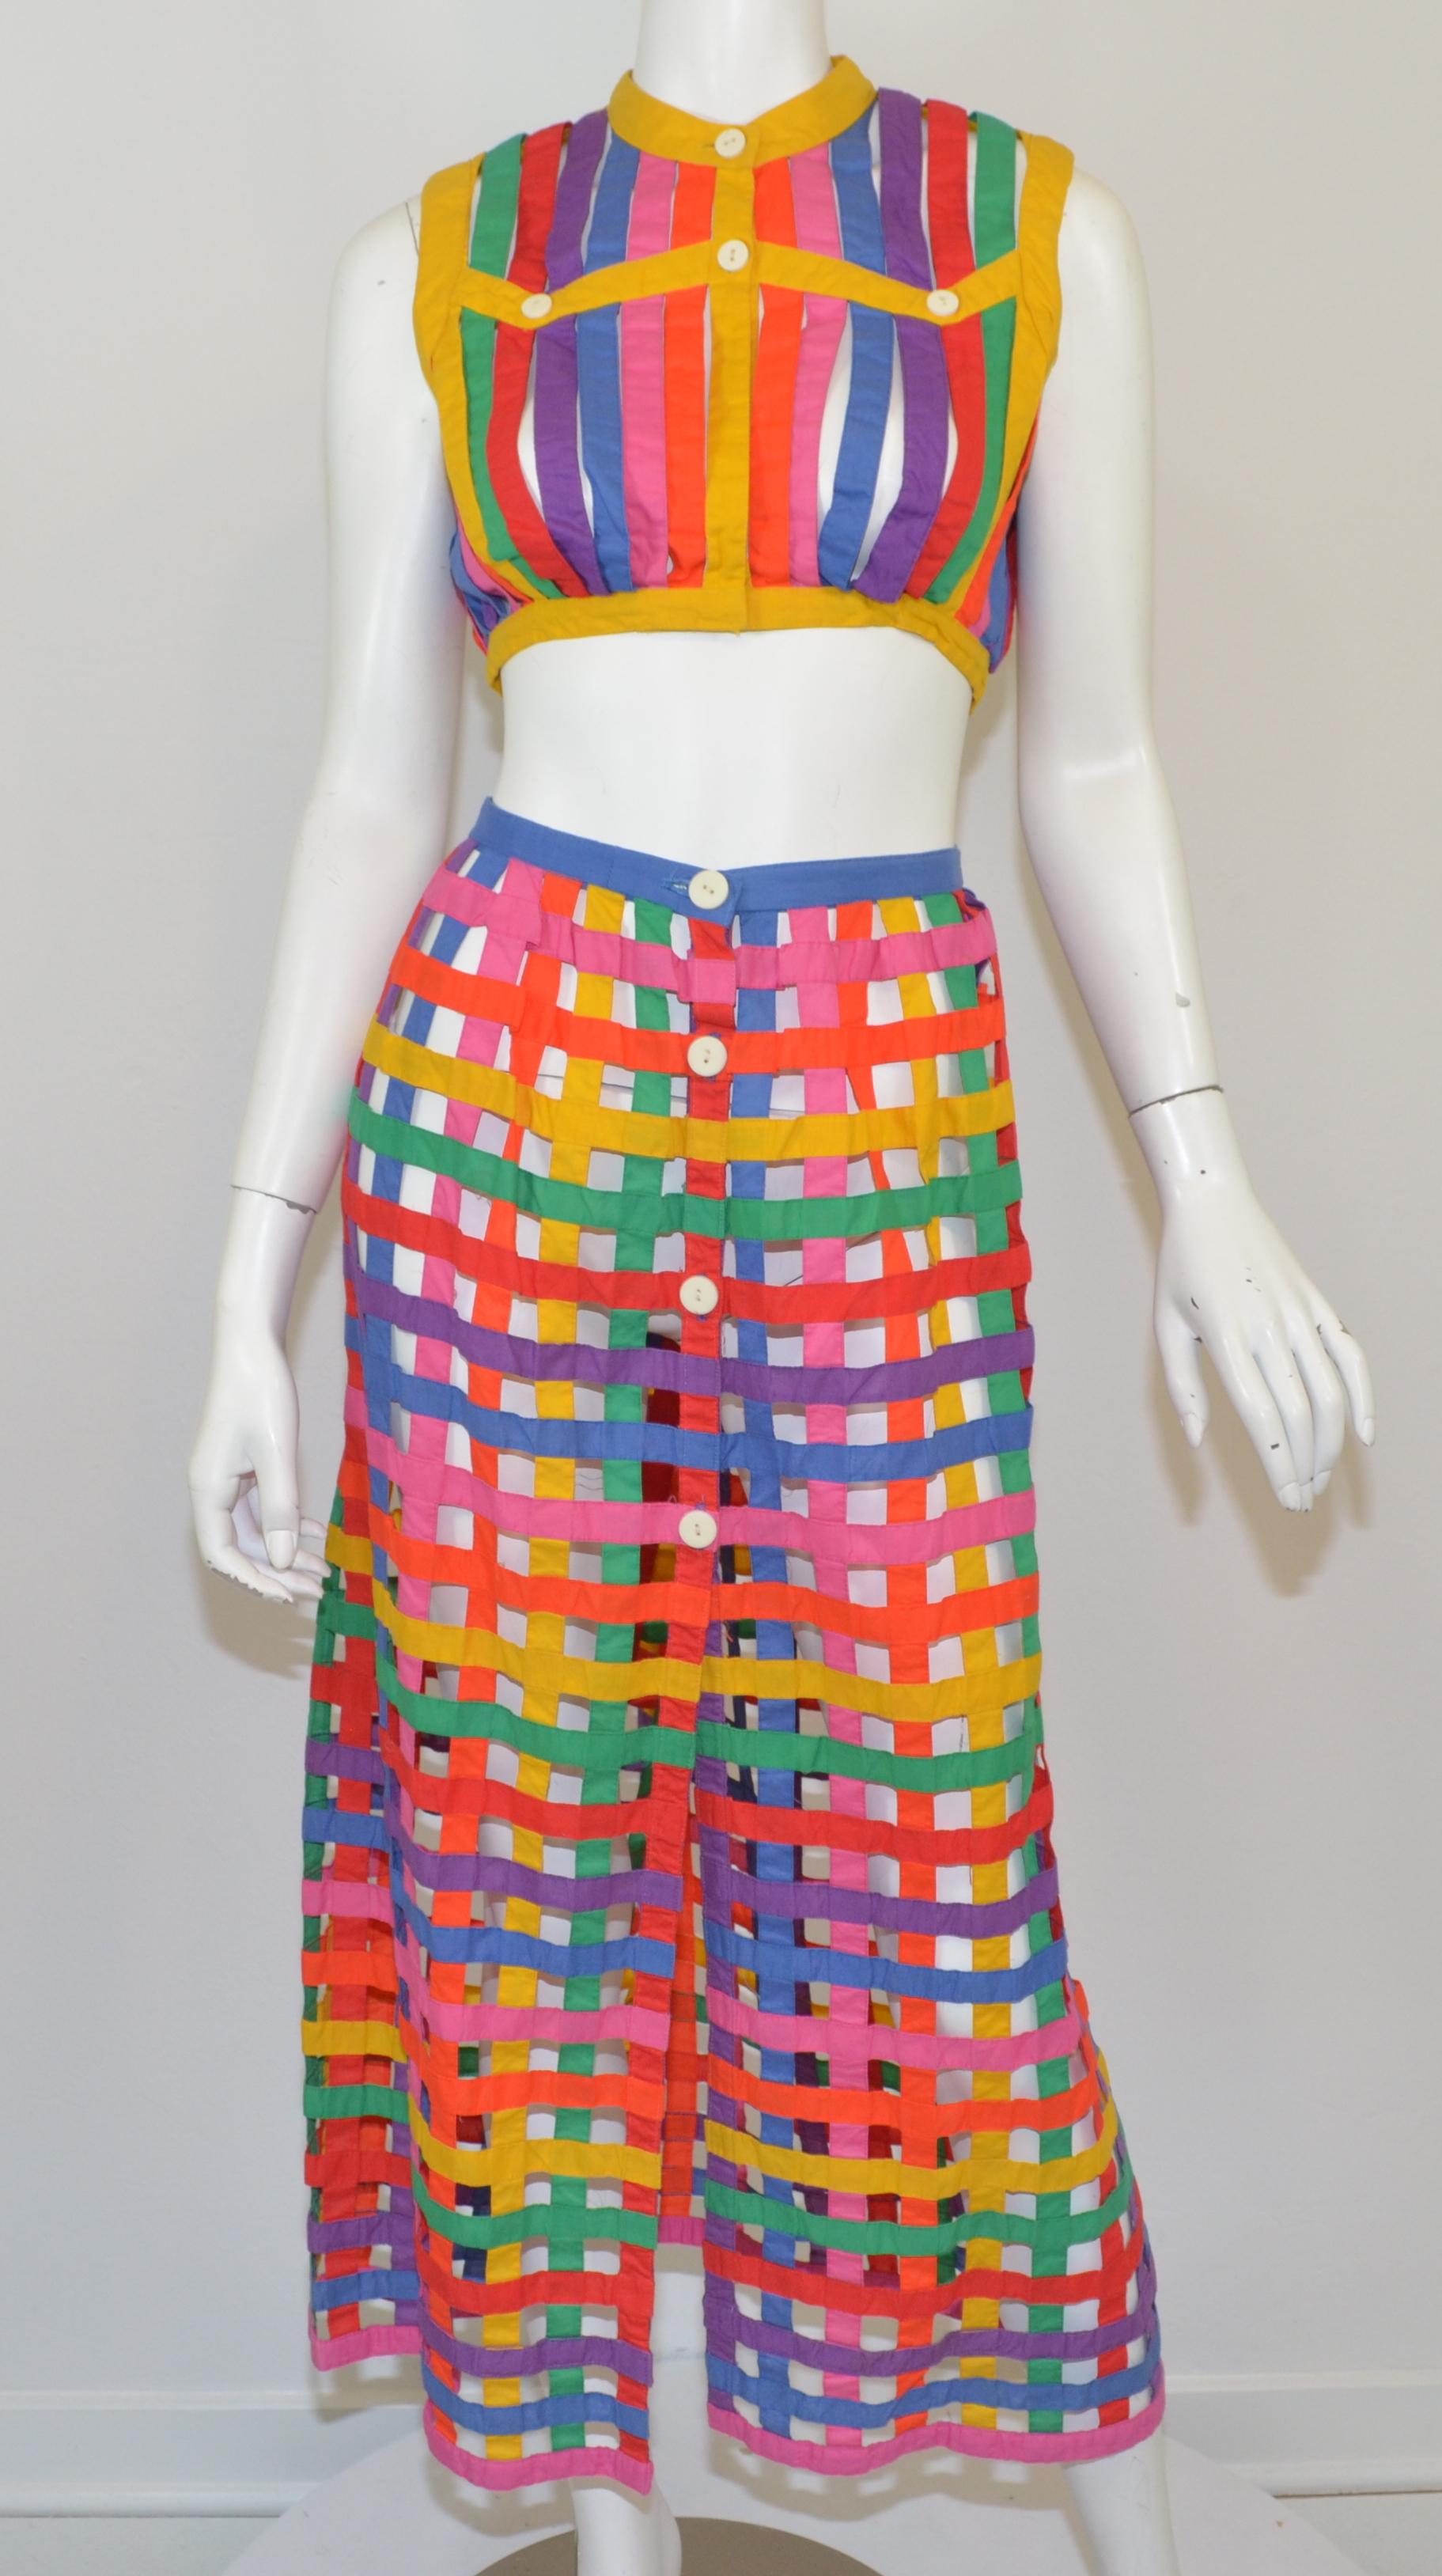 Vintage Bill Atkinson skirt set is featured in a multicolor caged design. Cropped top has button closures at the neck and a hook-and-eye fastening at the hem, and the skirt has button fastenings along the front. 

Measurements:
Top: bust 34”, waist